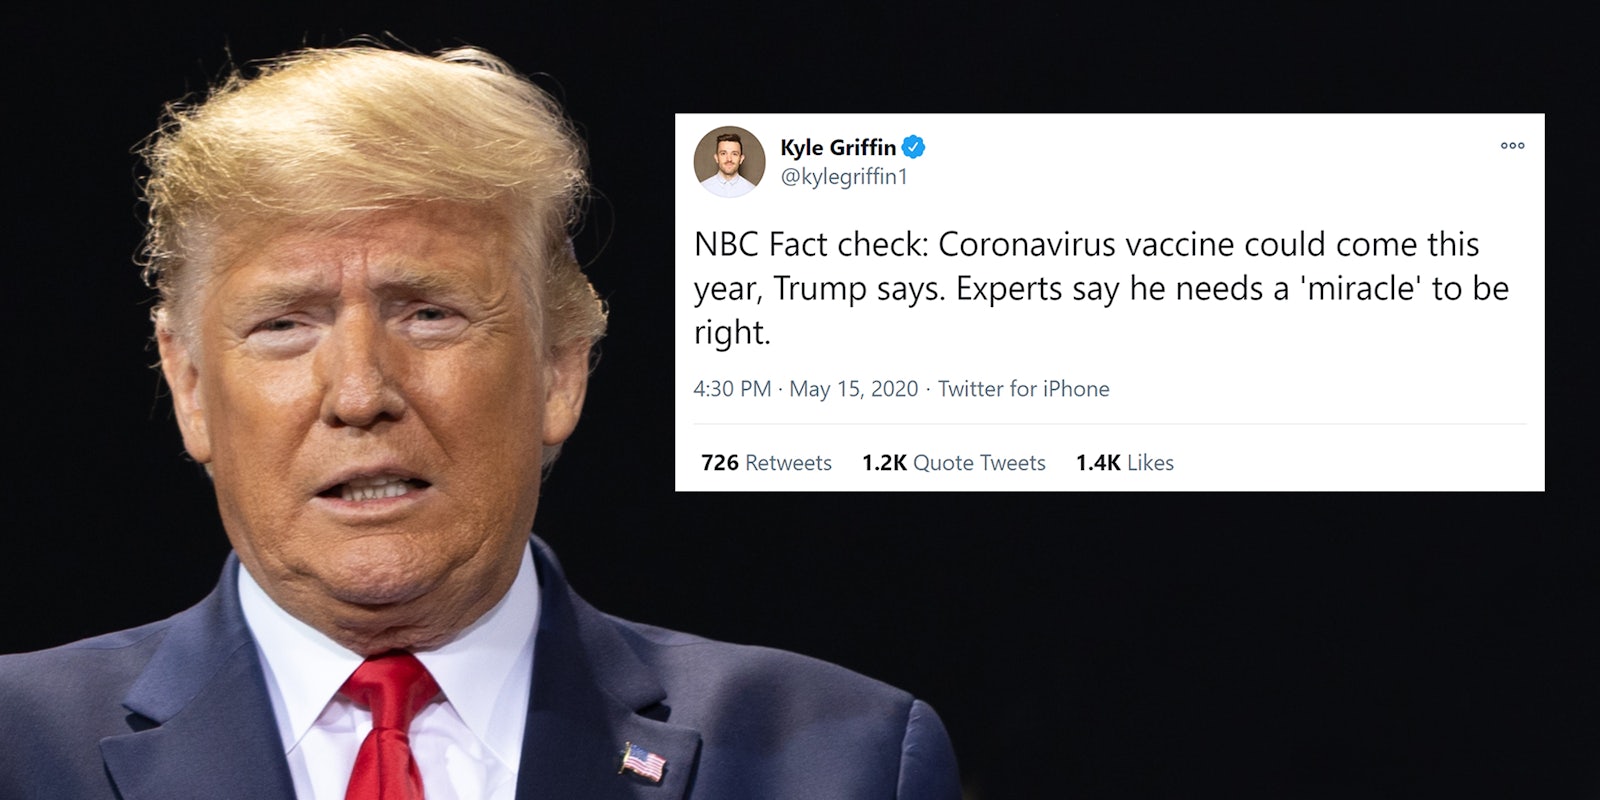 donald trump with kyle griffin tweet 'NBC Fact check: Coronavirus vaccine could come this year, Trump says. Experts say he needs a 'miracle' to be right.' tweet